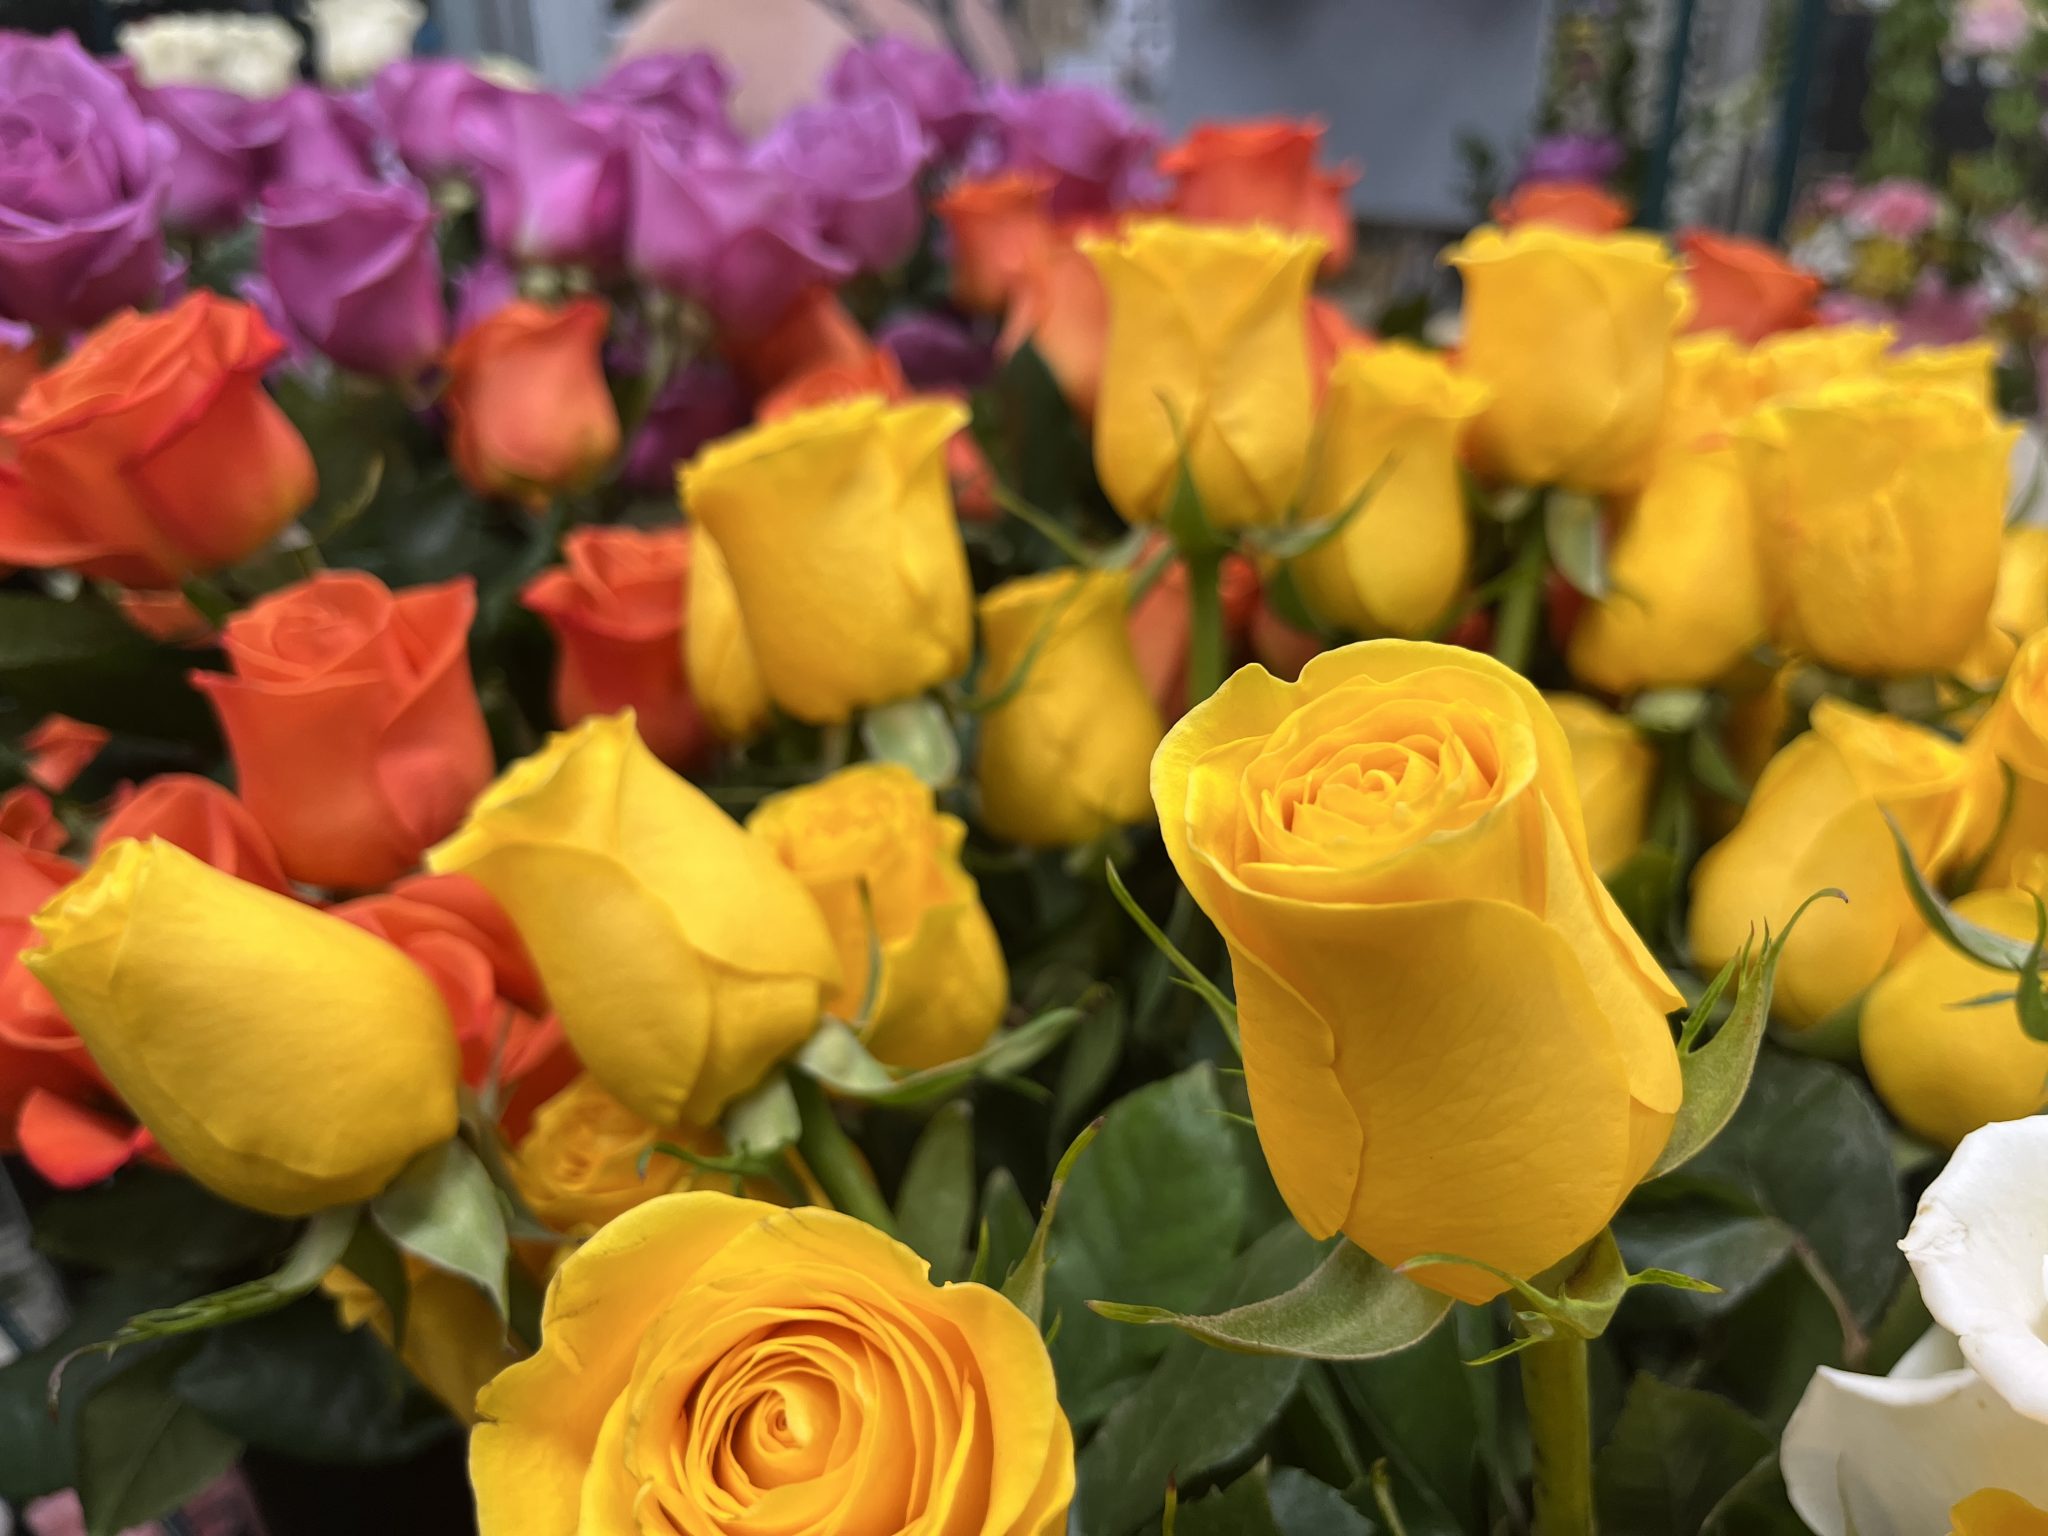 Multi-colored mass of roses.